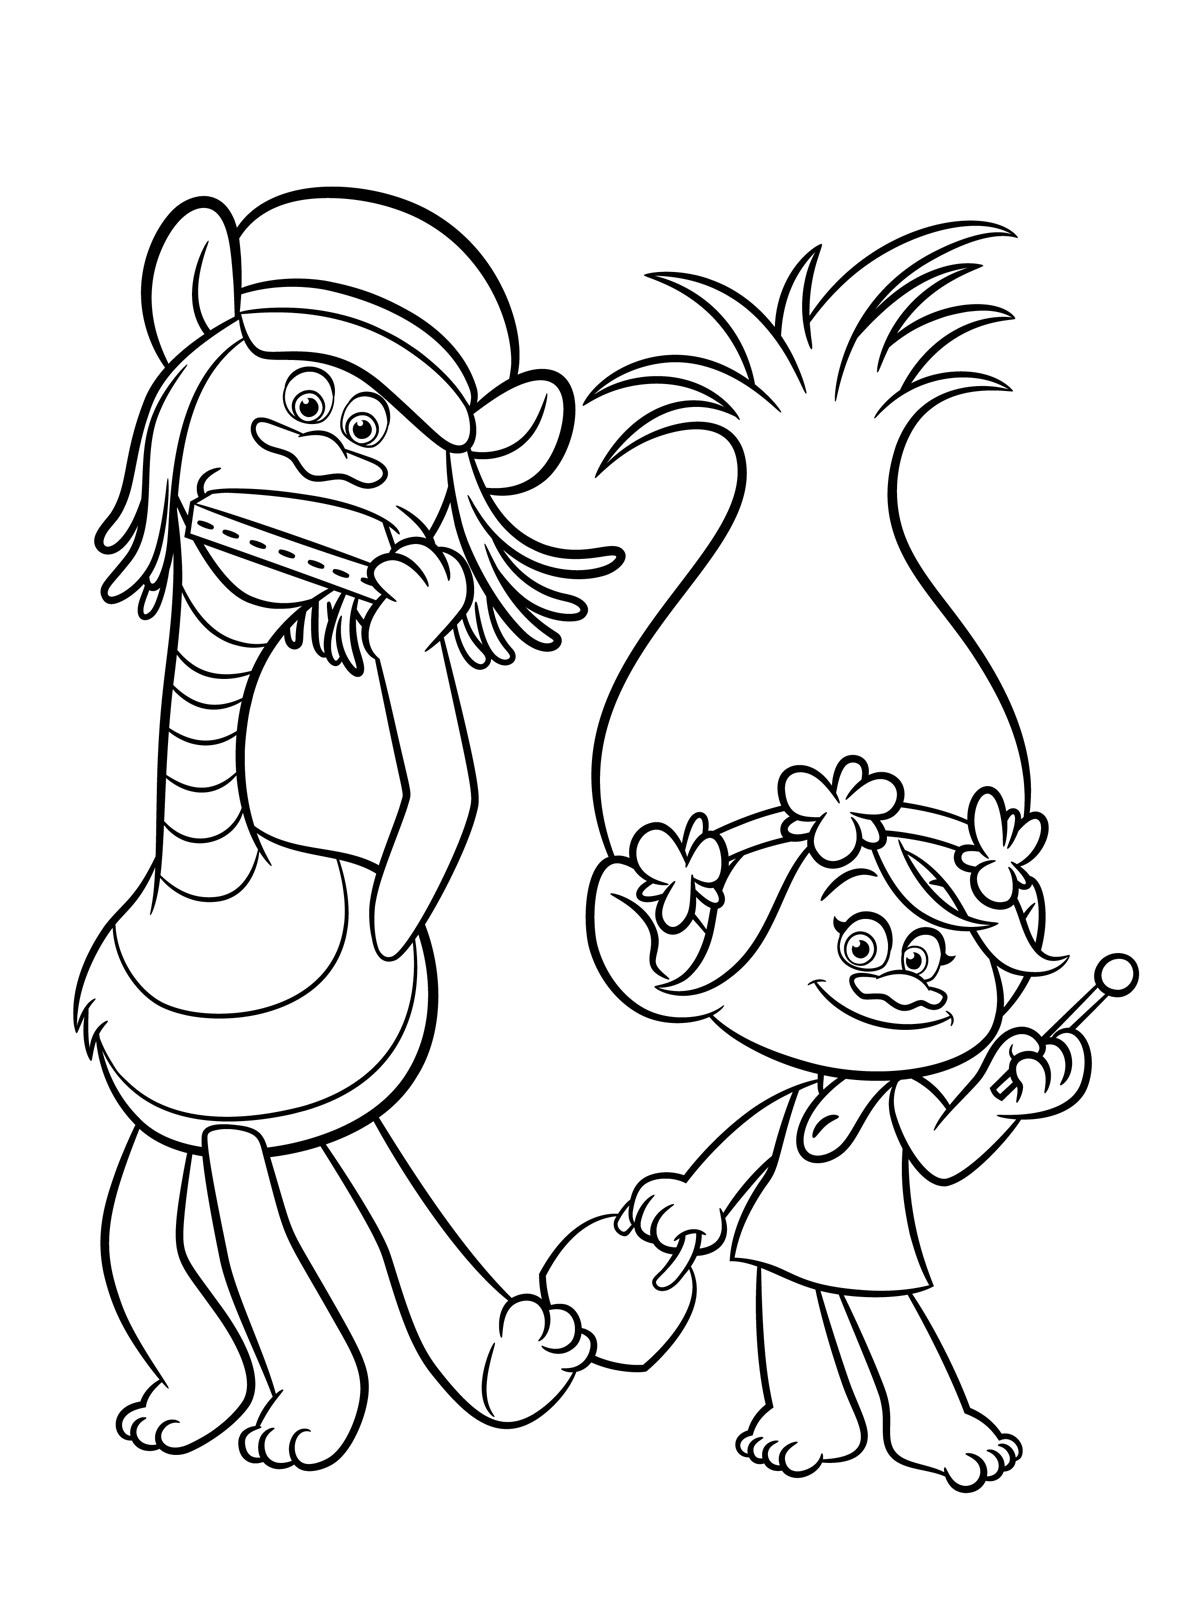 Printable Trolls Coloring Pages at GetColorings.com | Free printable ...